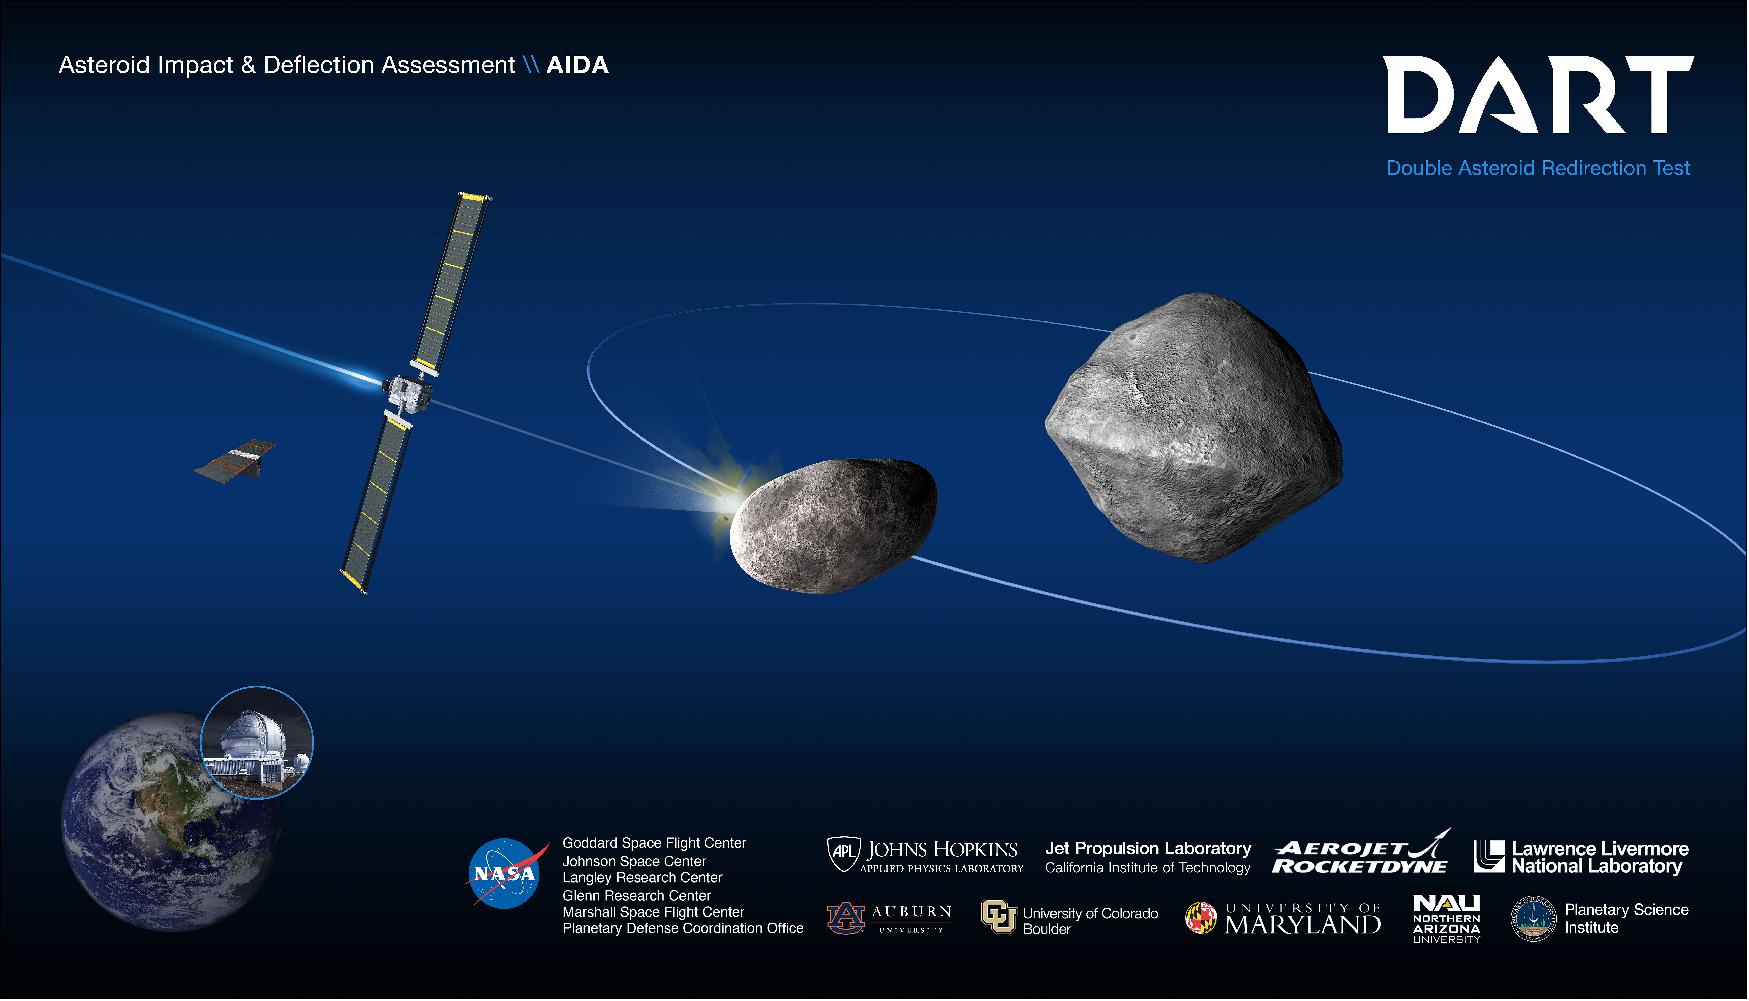 Figure 1: Overview of the DART mission concept (image credit: JHU/APL)